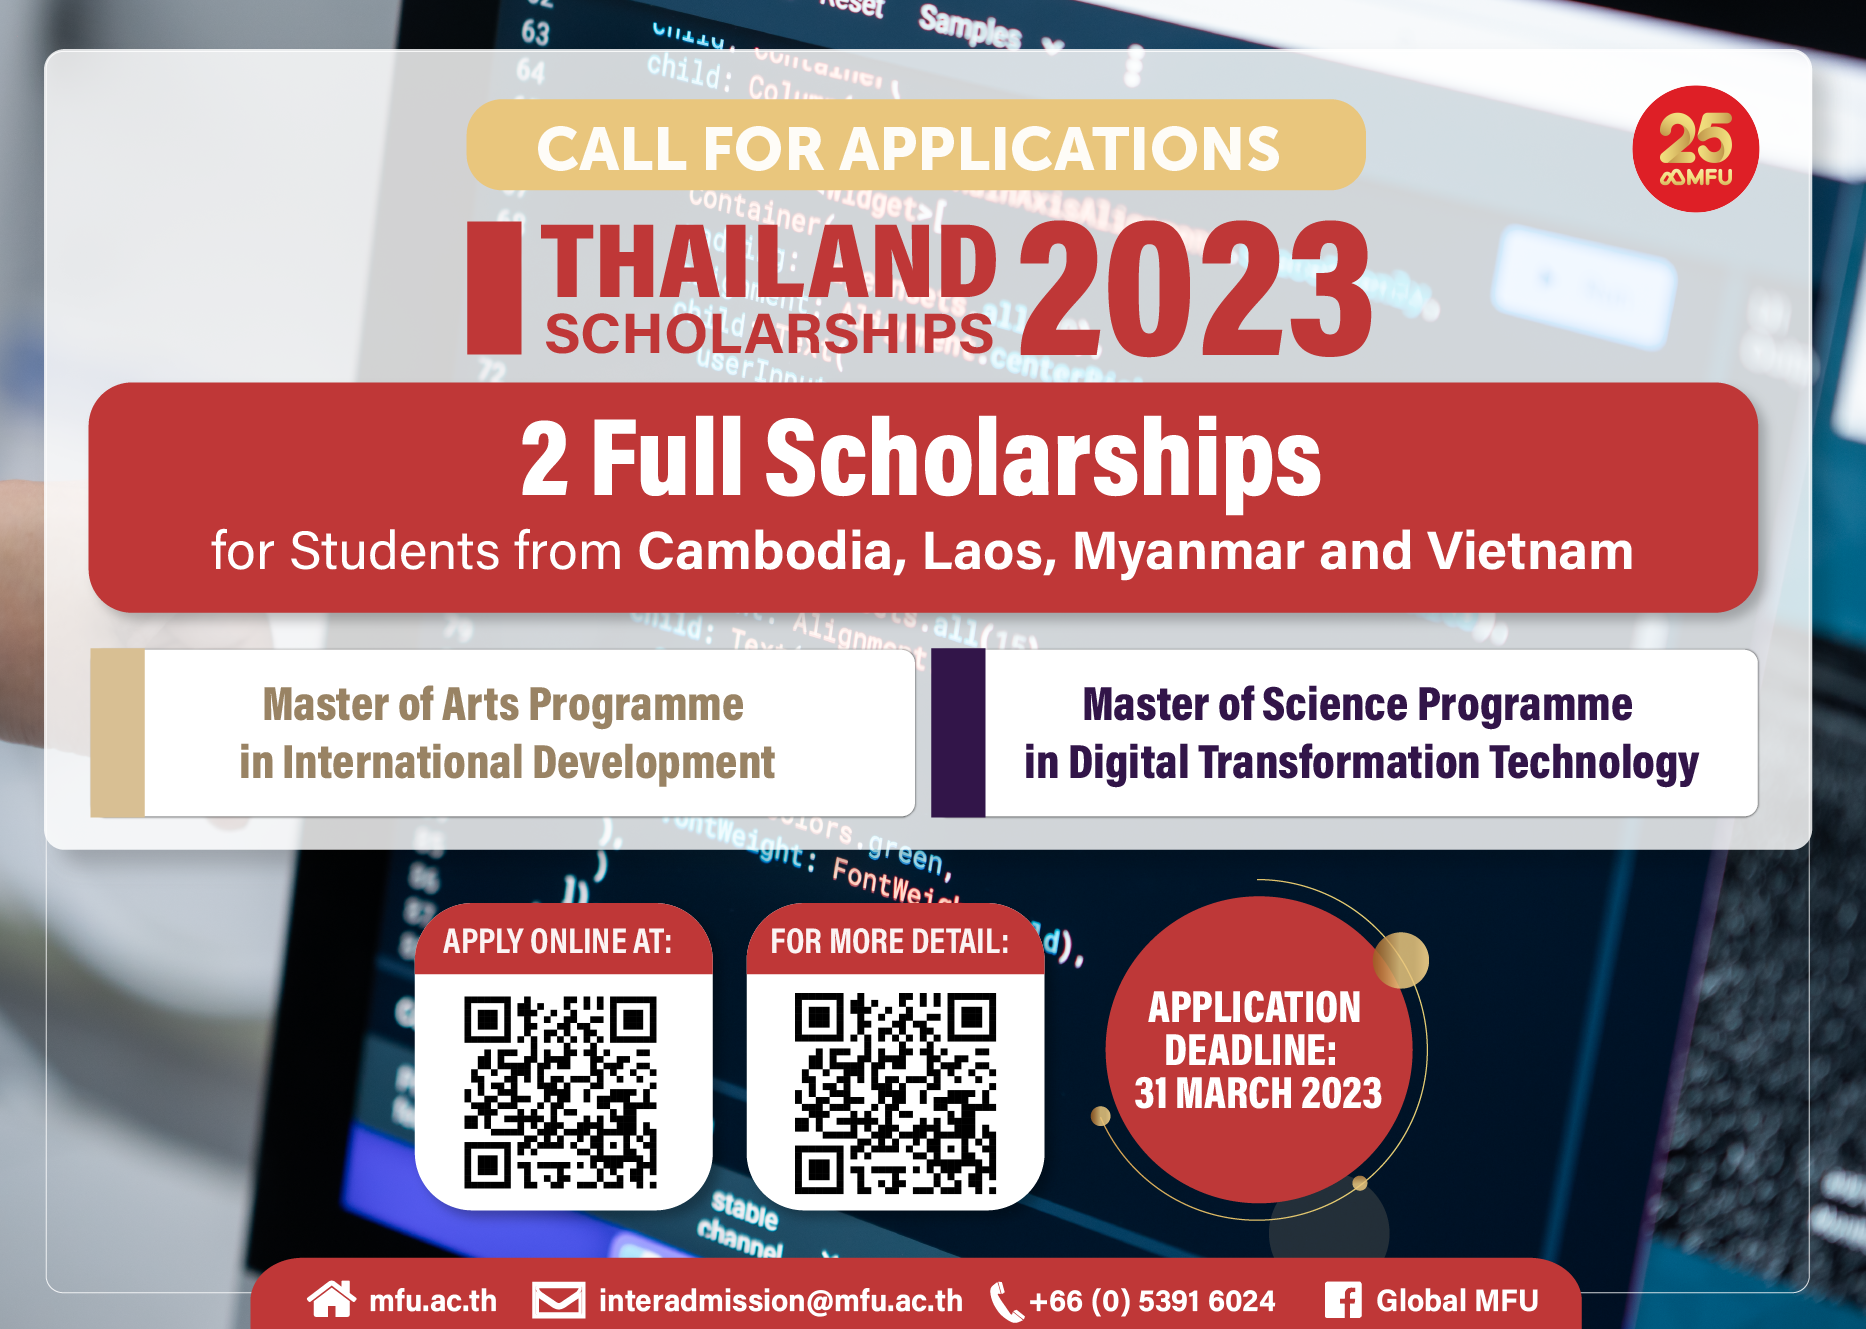 Call for Applications: Thailand Scholarships 2023 for Cambodia/Laos/Myanmar/Vietnam